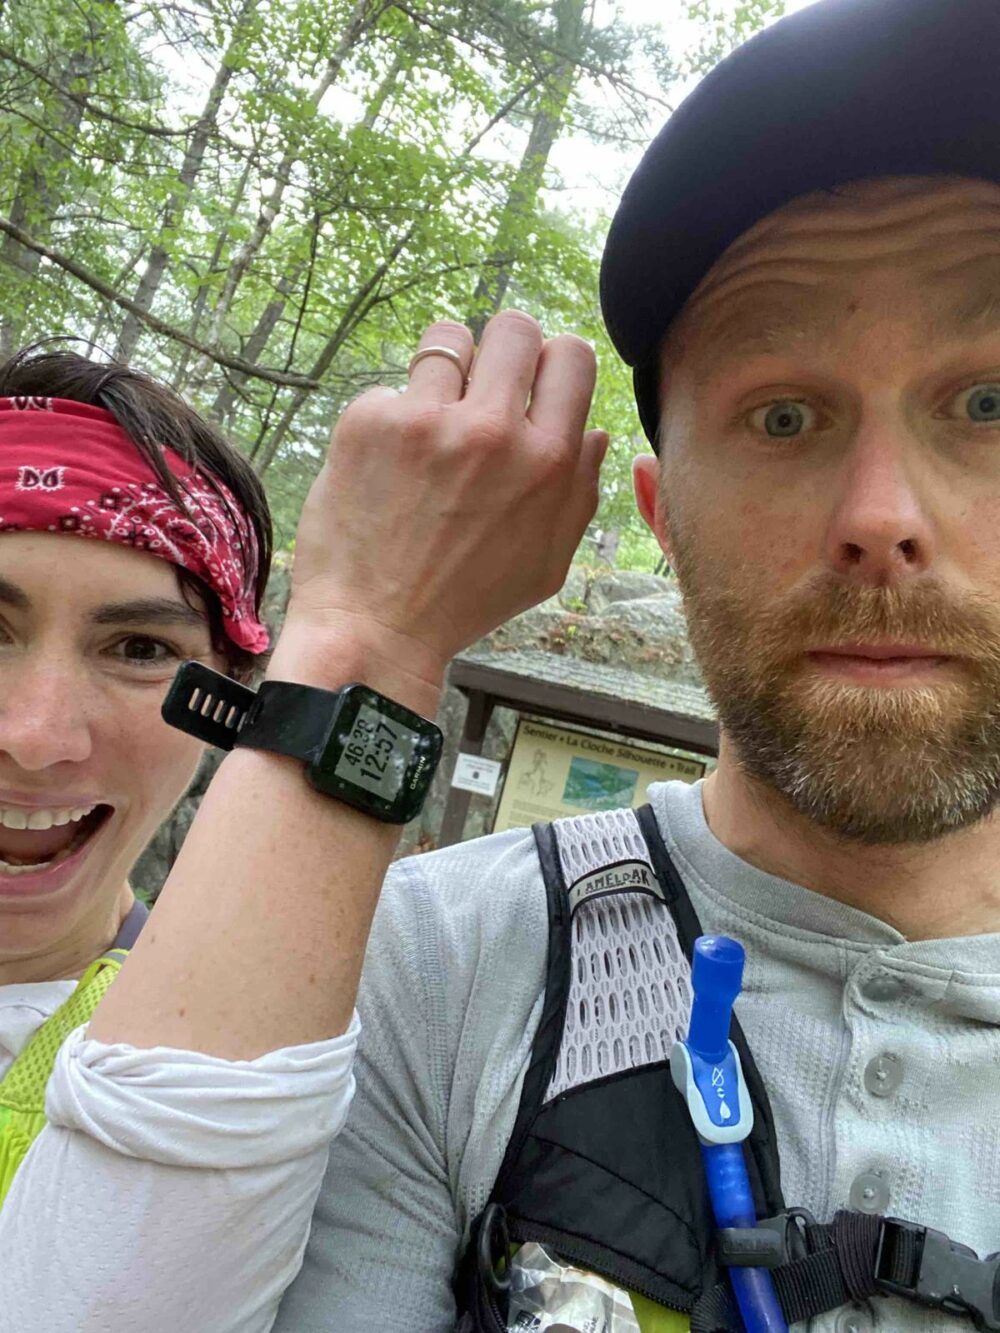 Two individuals, one wearing a pink bandana and the other a white cap, pose outdoors in a wooded area. The person on the right sports a hydration pack and raises a hand to show a smartwatch. Both appear to be dressed in athletic gear for an outdoor activity.